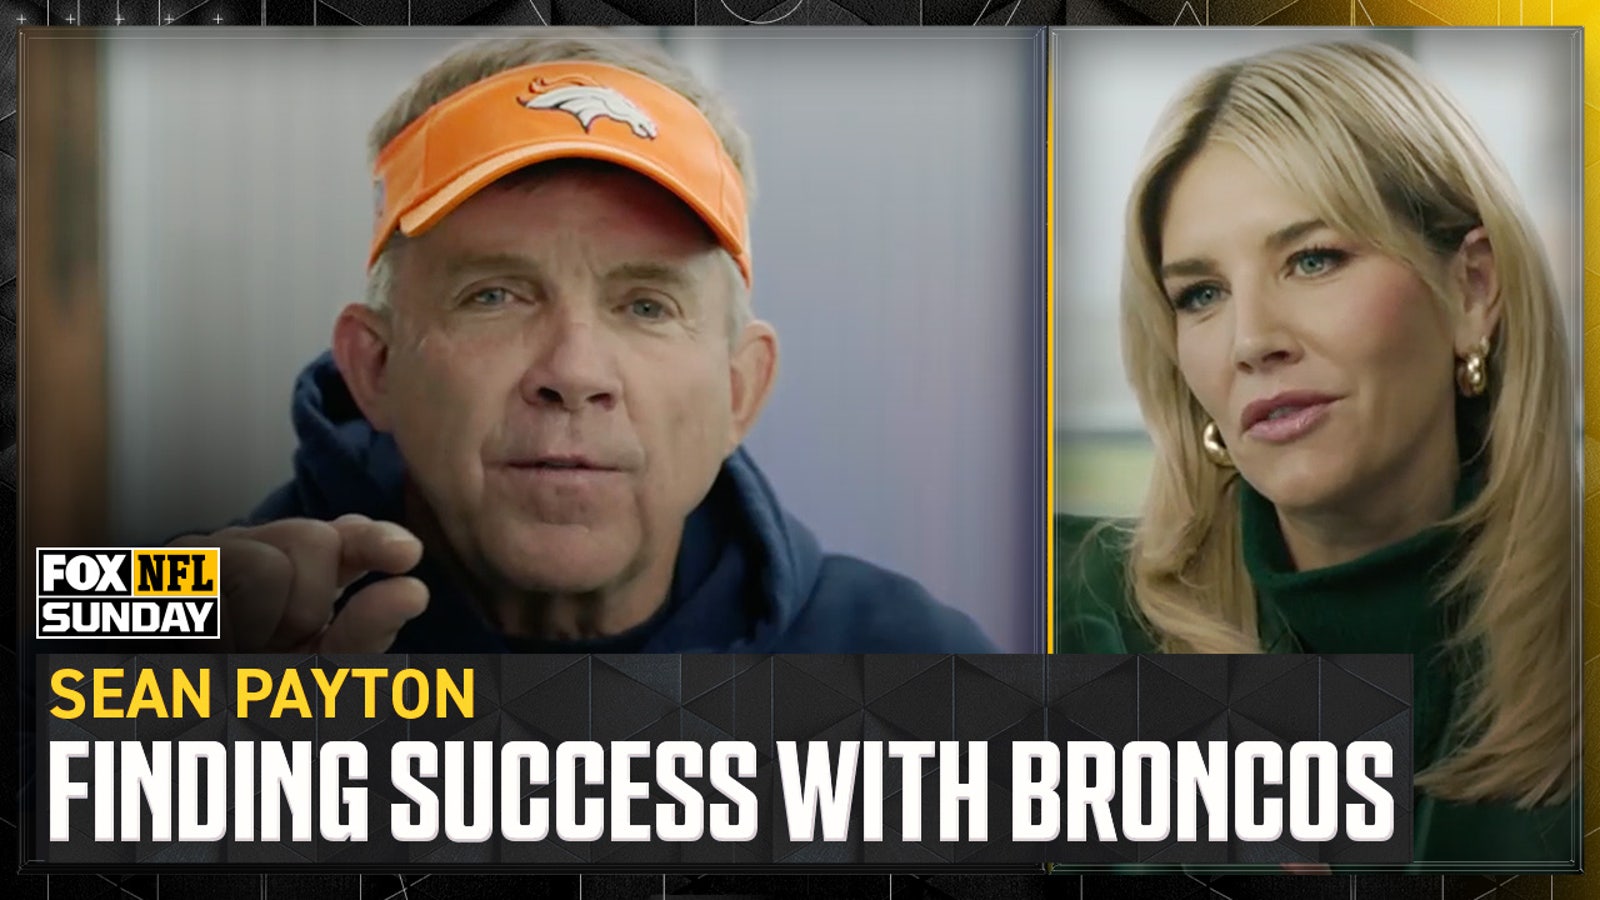 Sean Payton on finding success with Broncos in first season